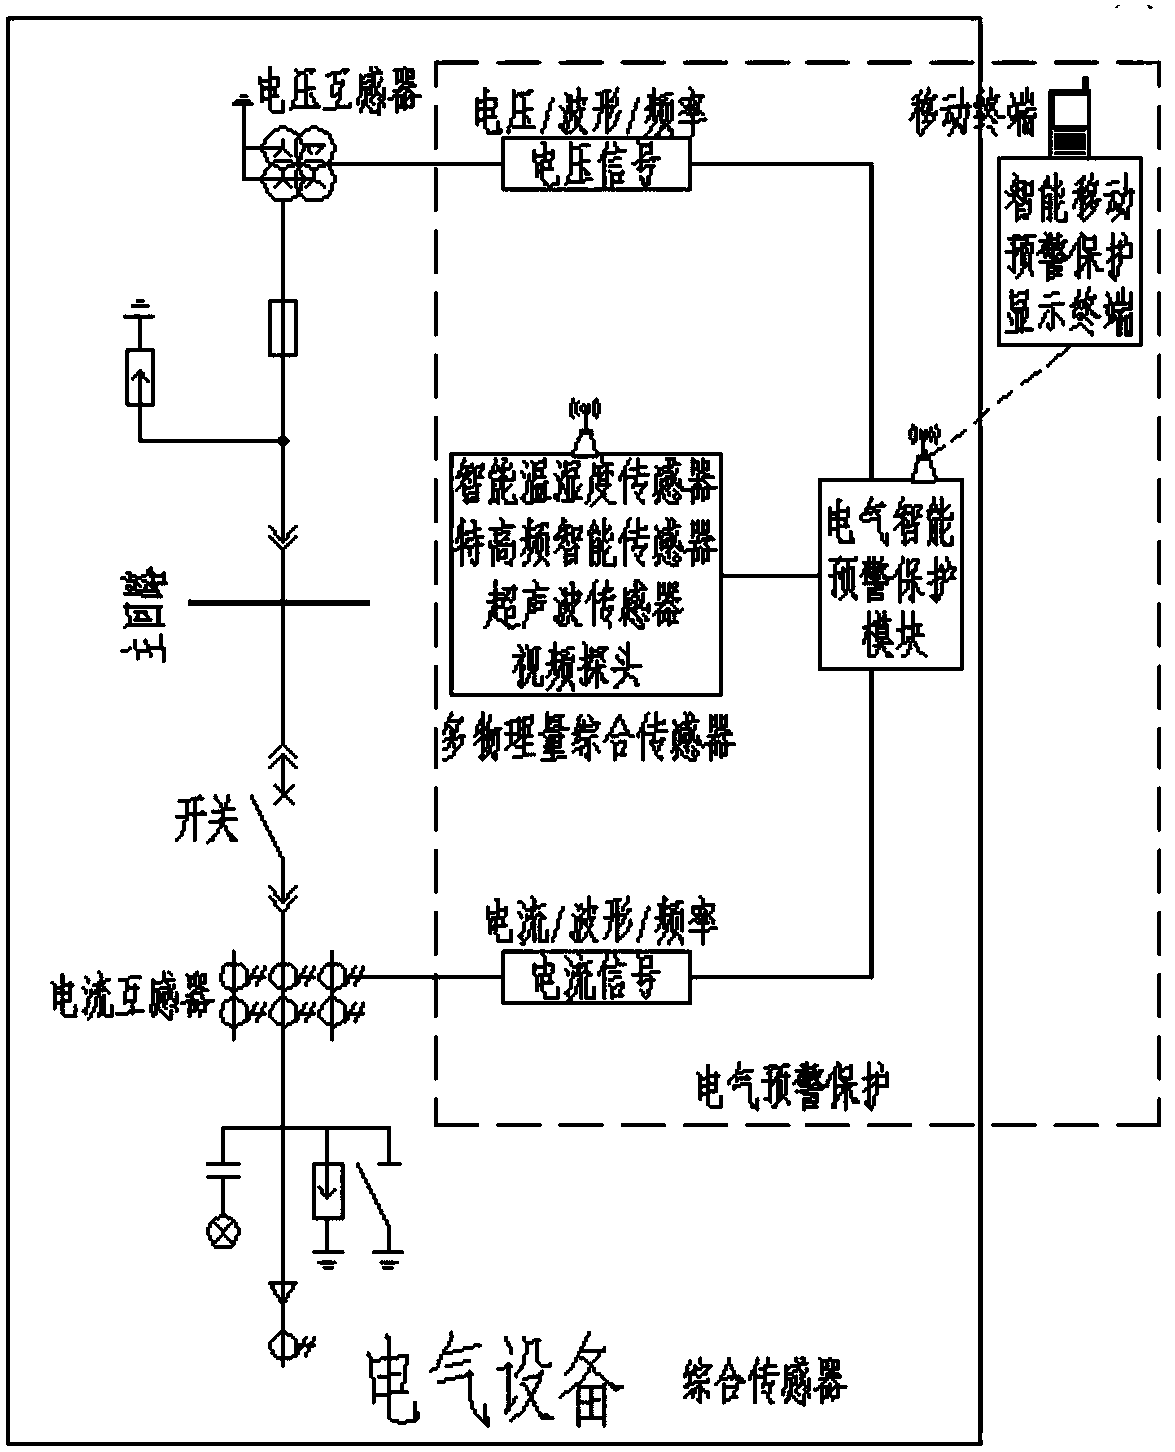 Electrical early warning protection system and method